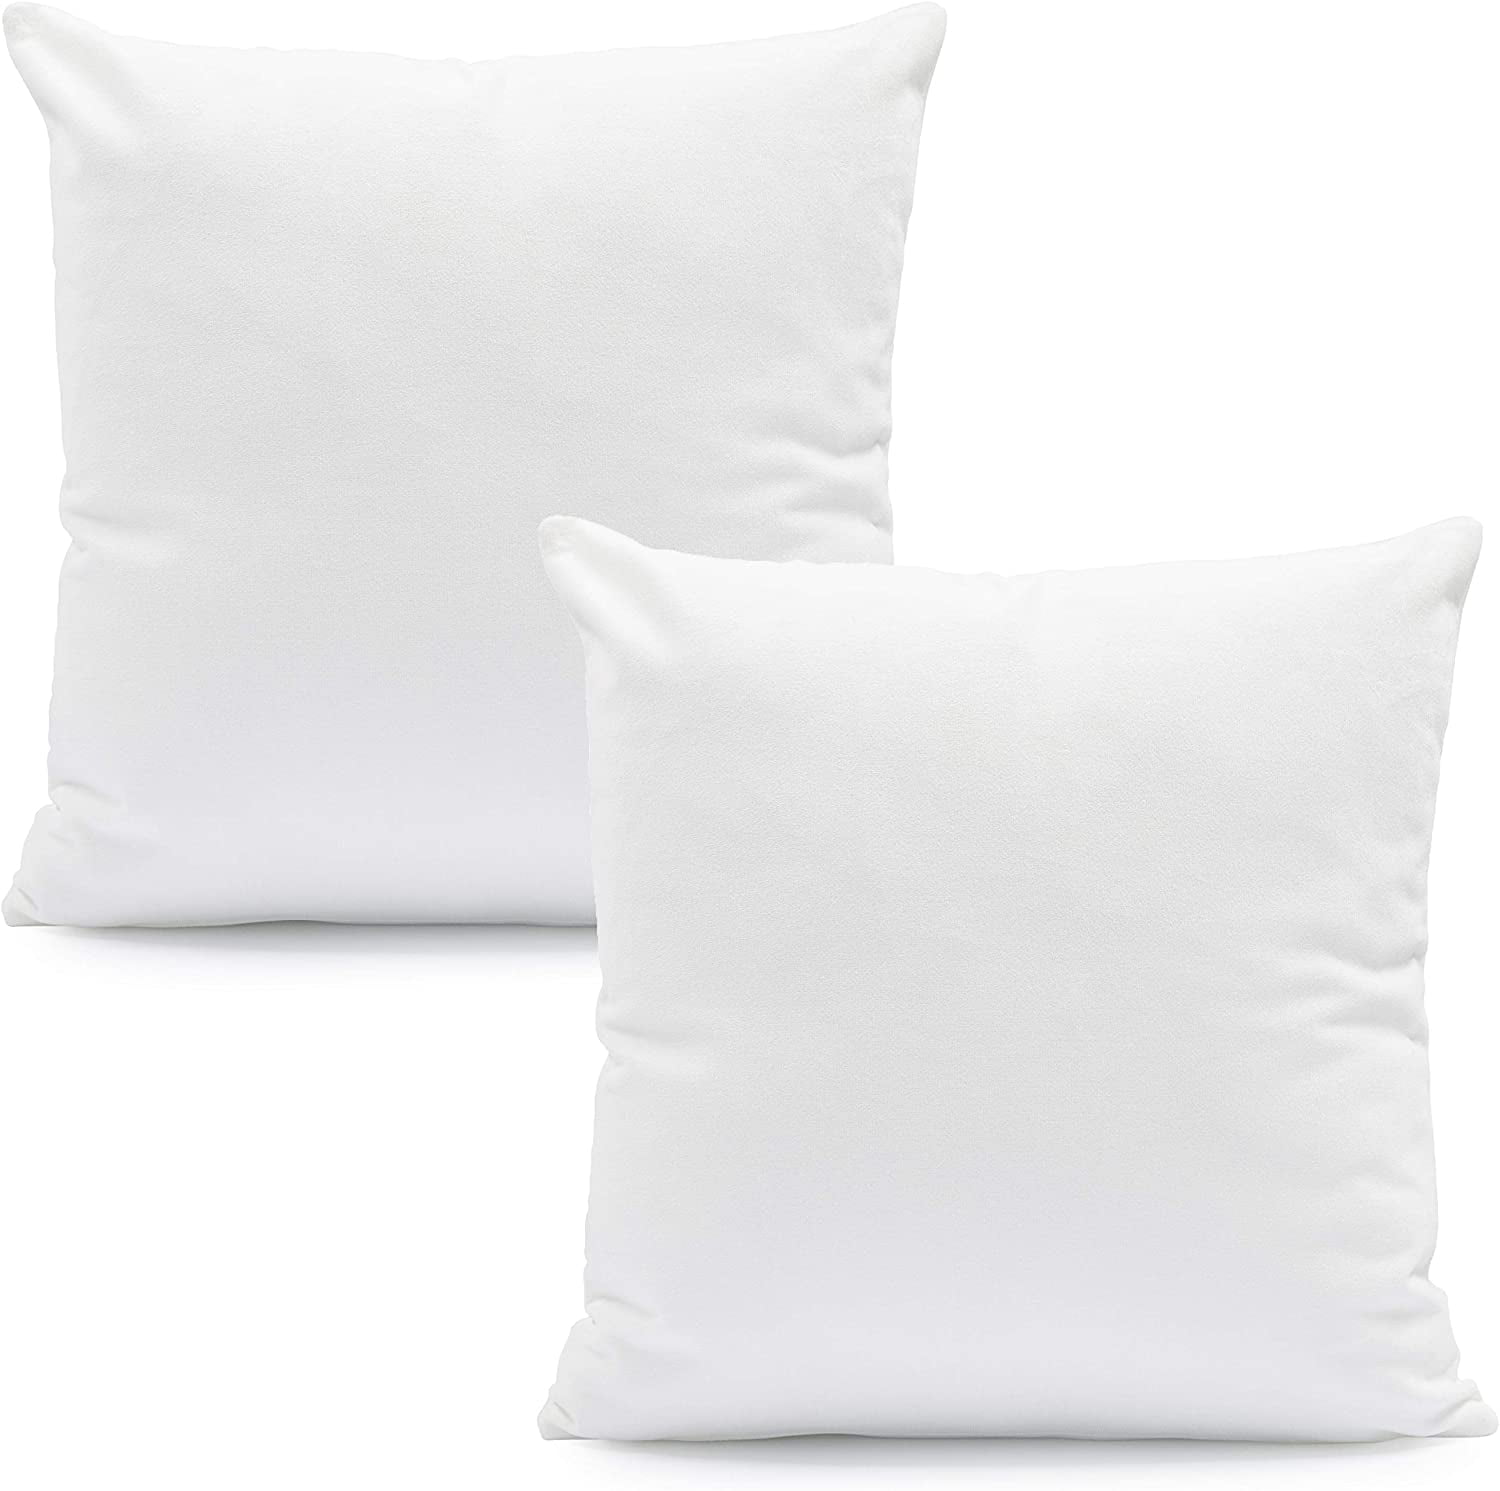 couch pillow covers ikea